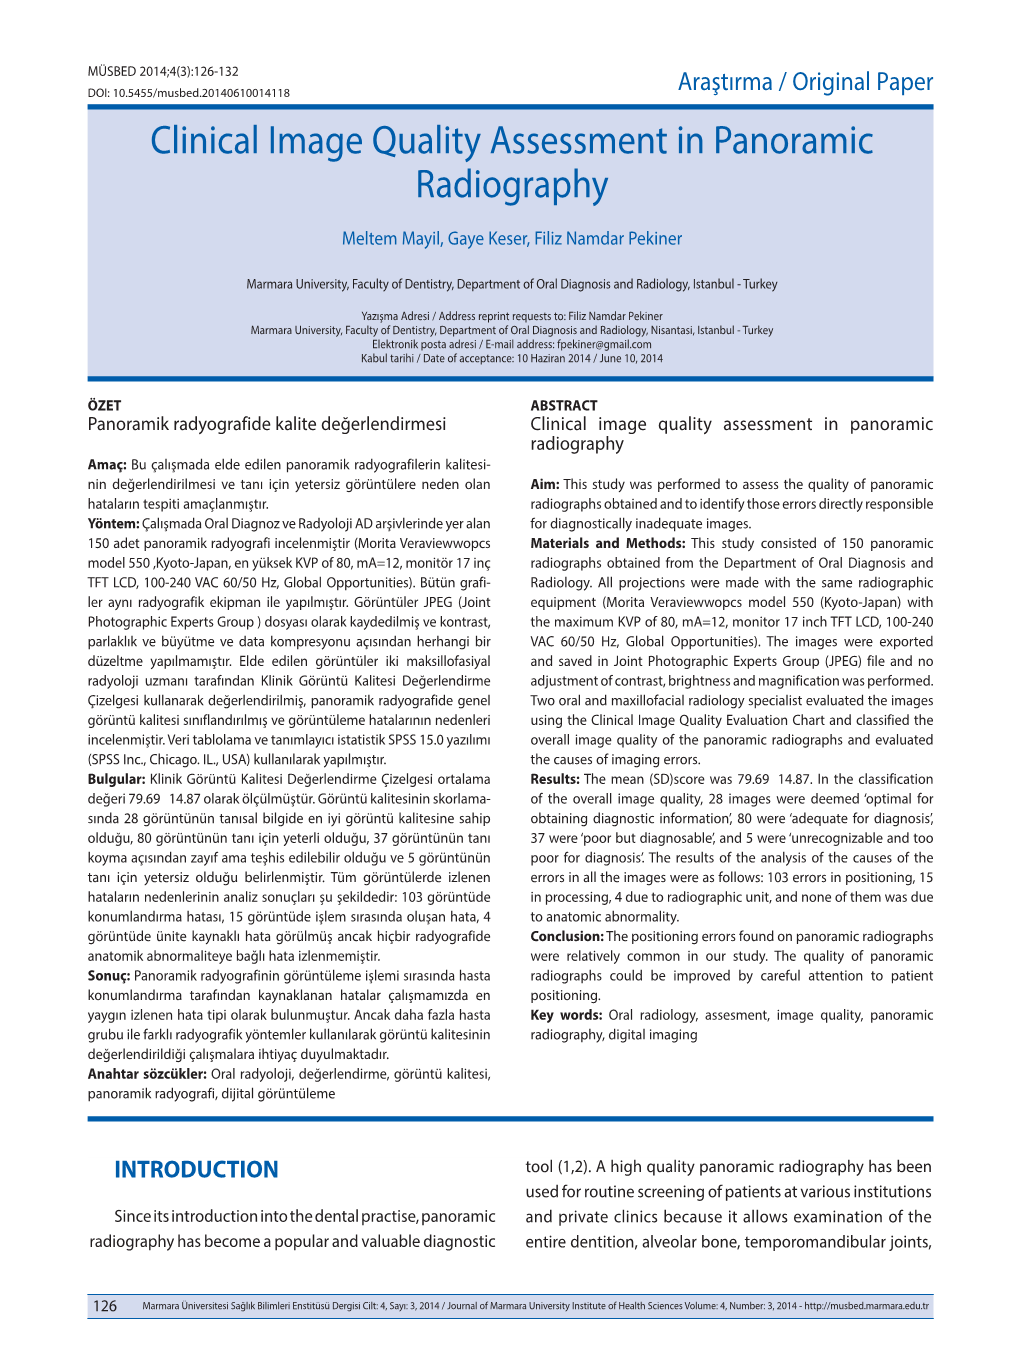 Clinical Image Quality Assessment in Panoramic Radiography